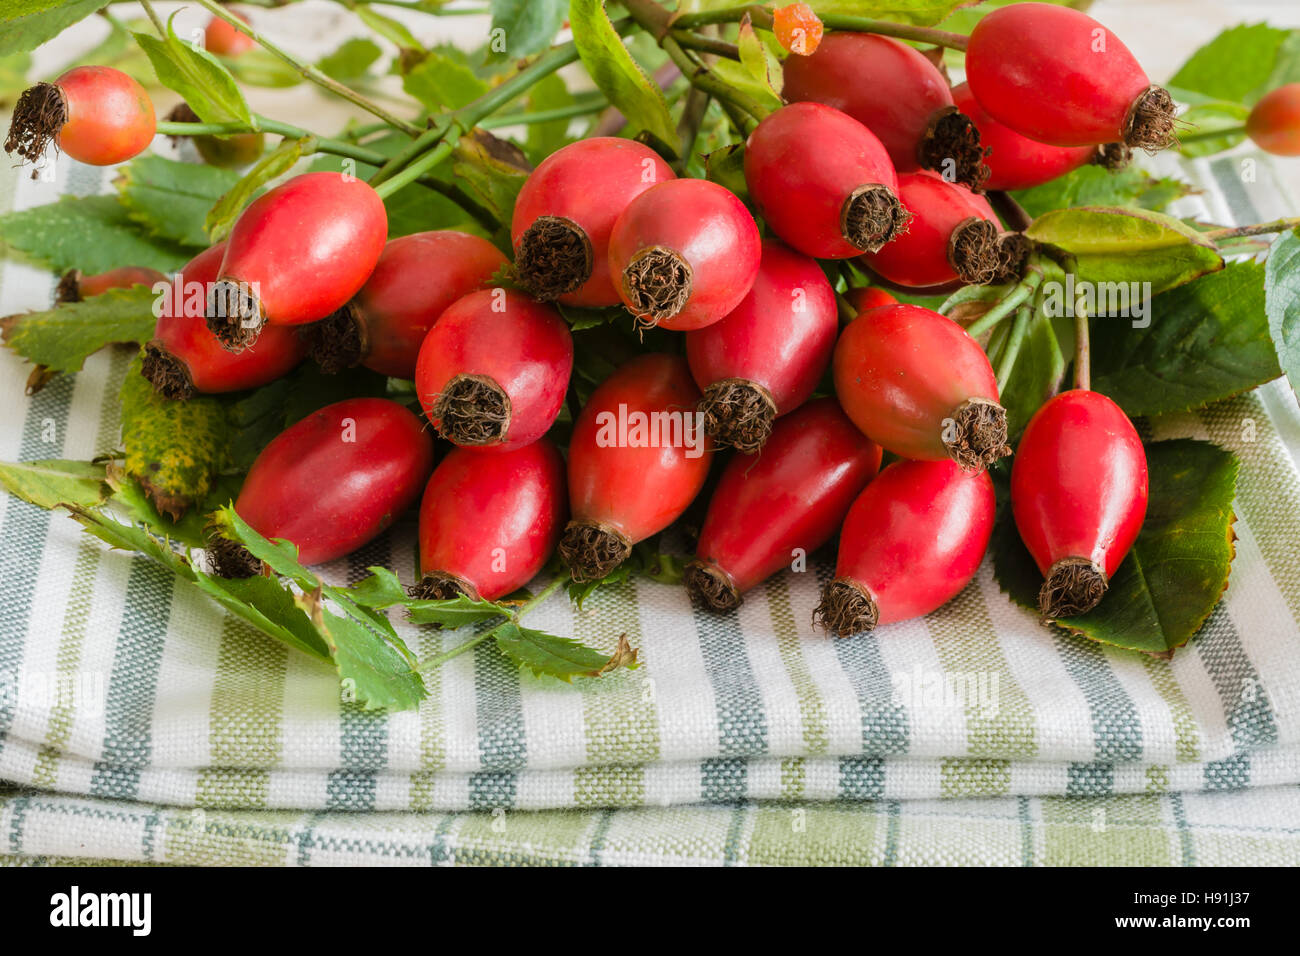 Fresh picked Rose Hips or rose haws and Autumnal fruit of the wild Dog Rose Stock Photo